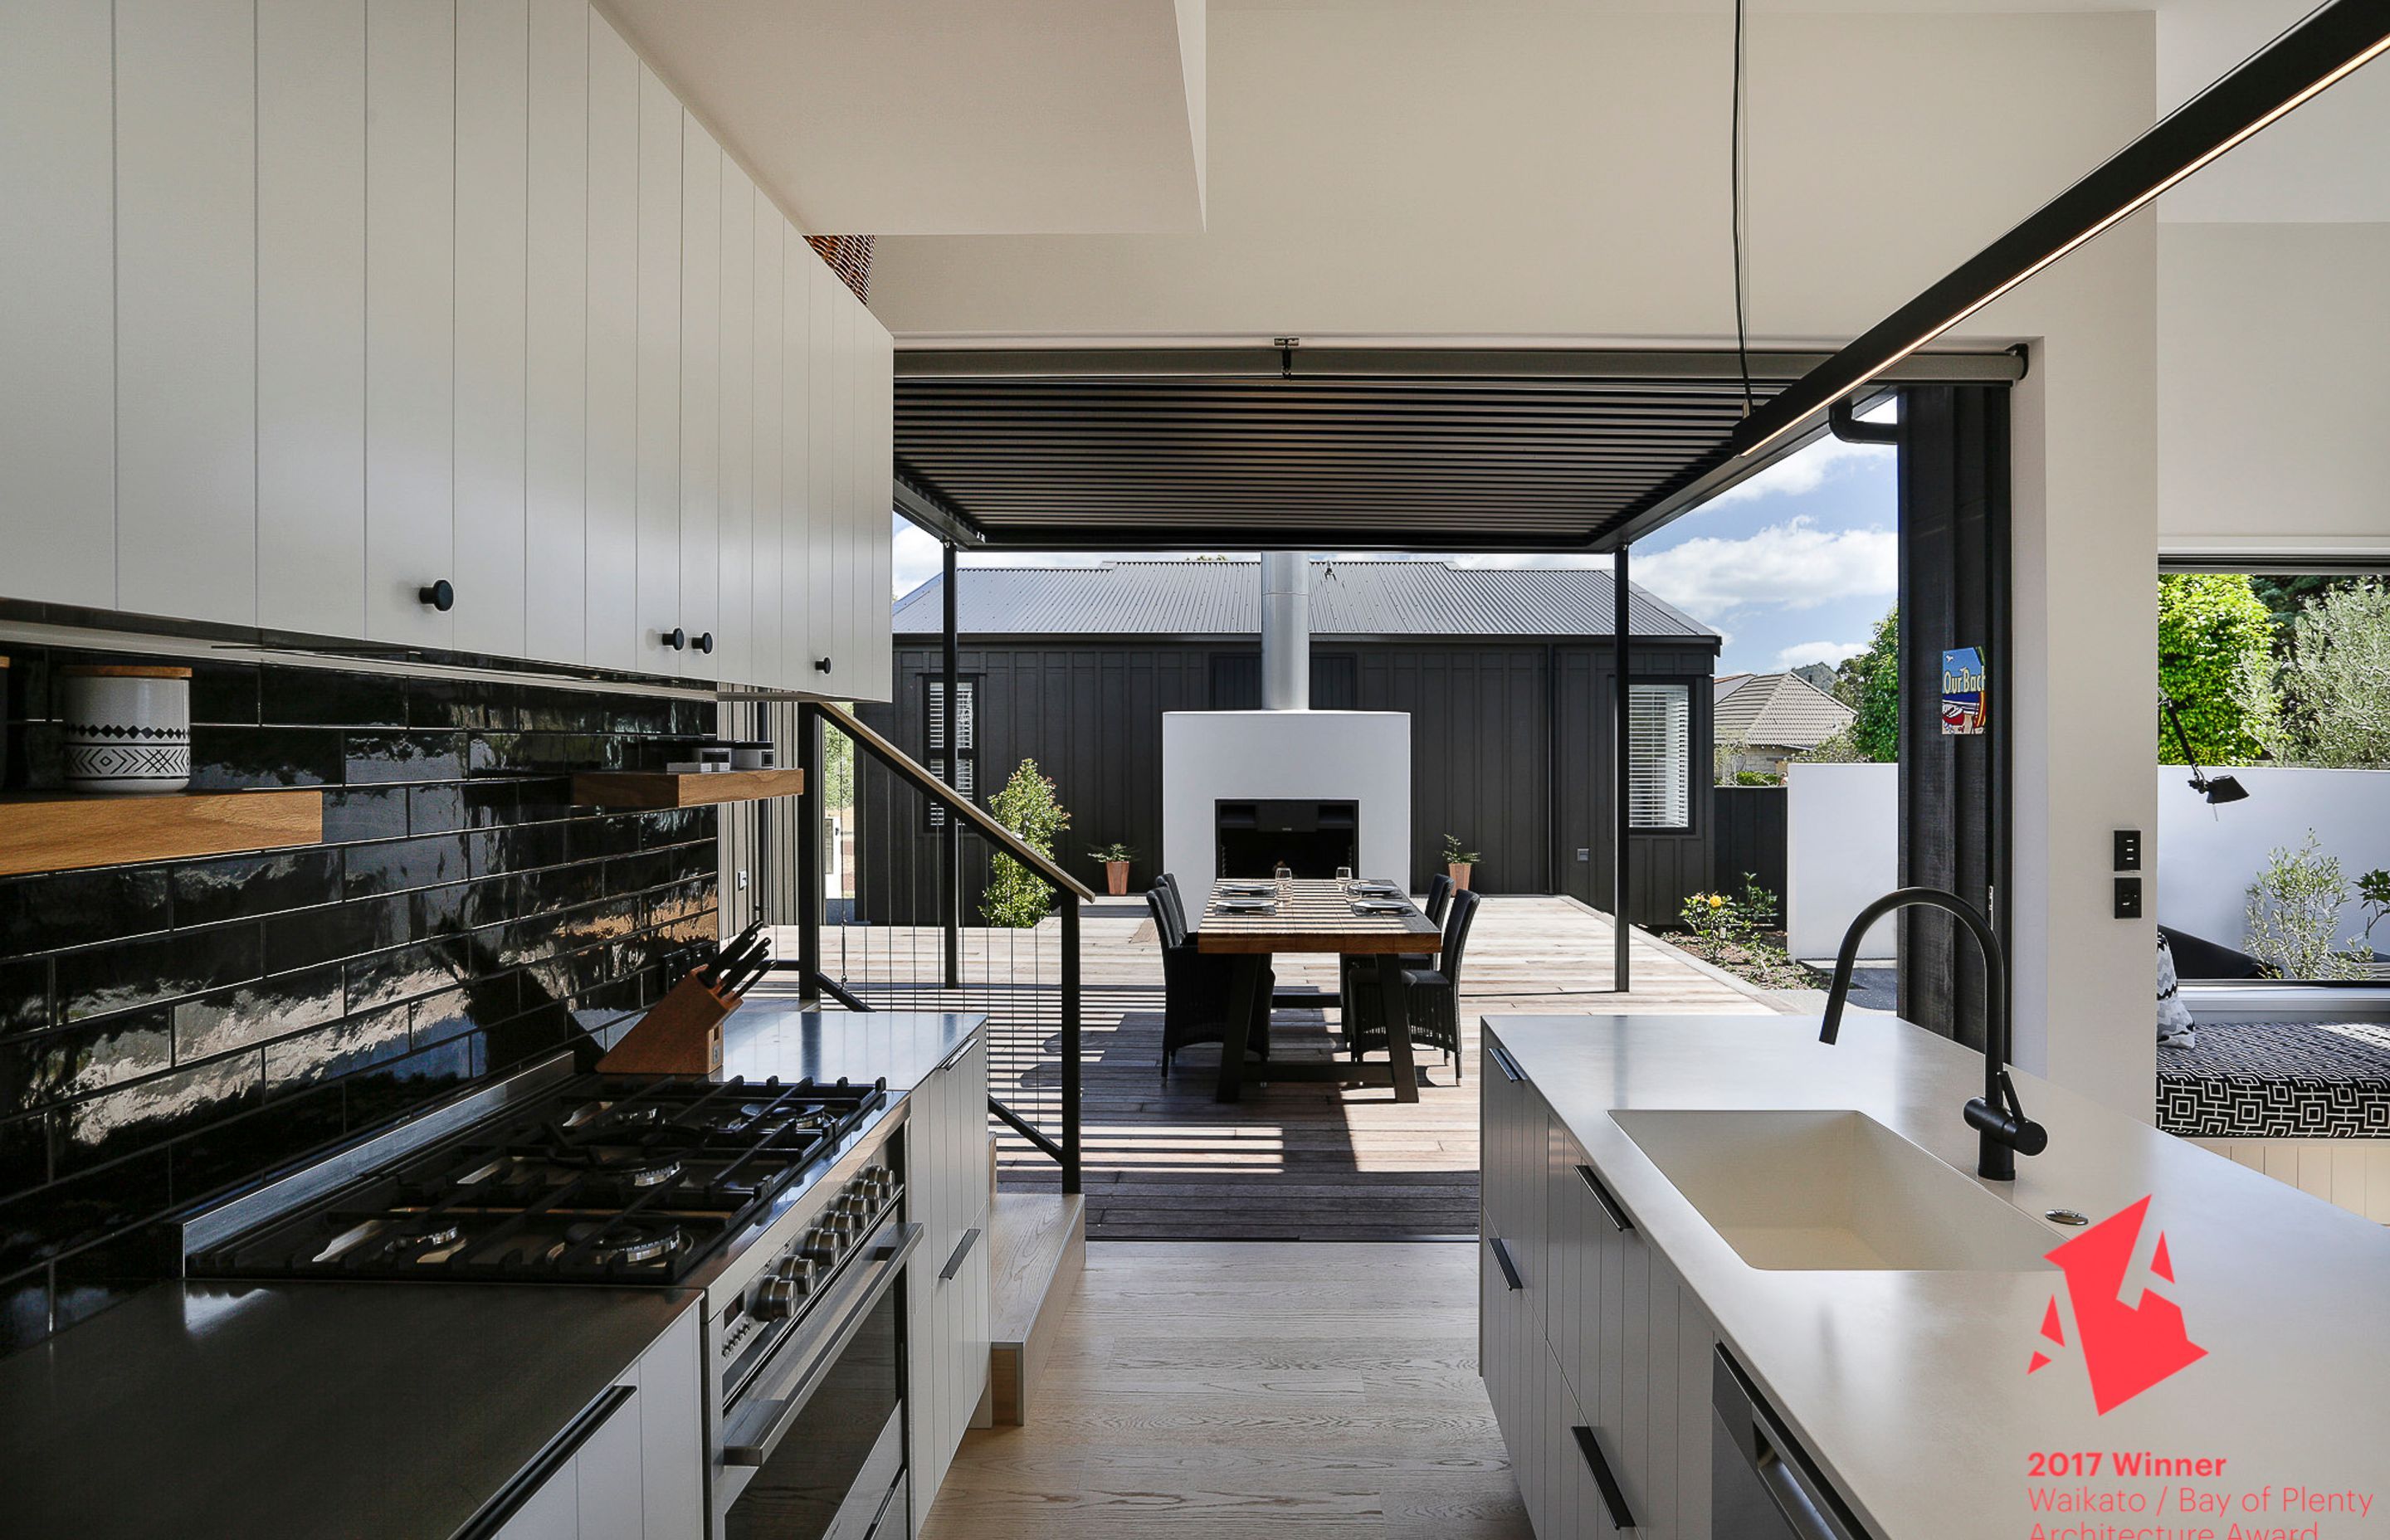 The Locarno lovure roof system works perfectly with this Pauanui home's breezy outdoor room.